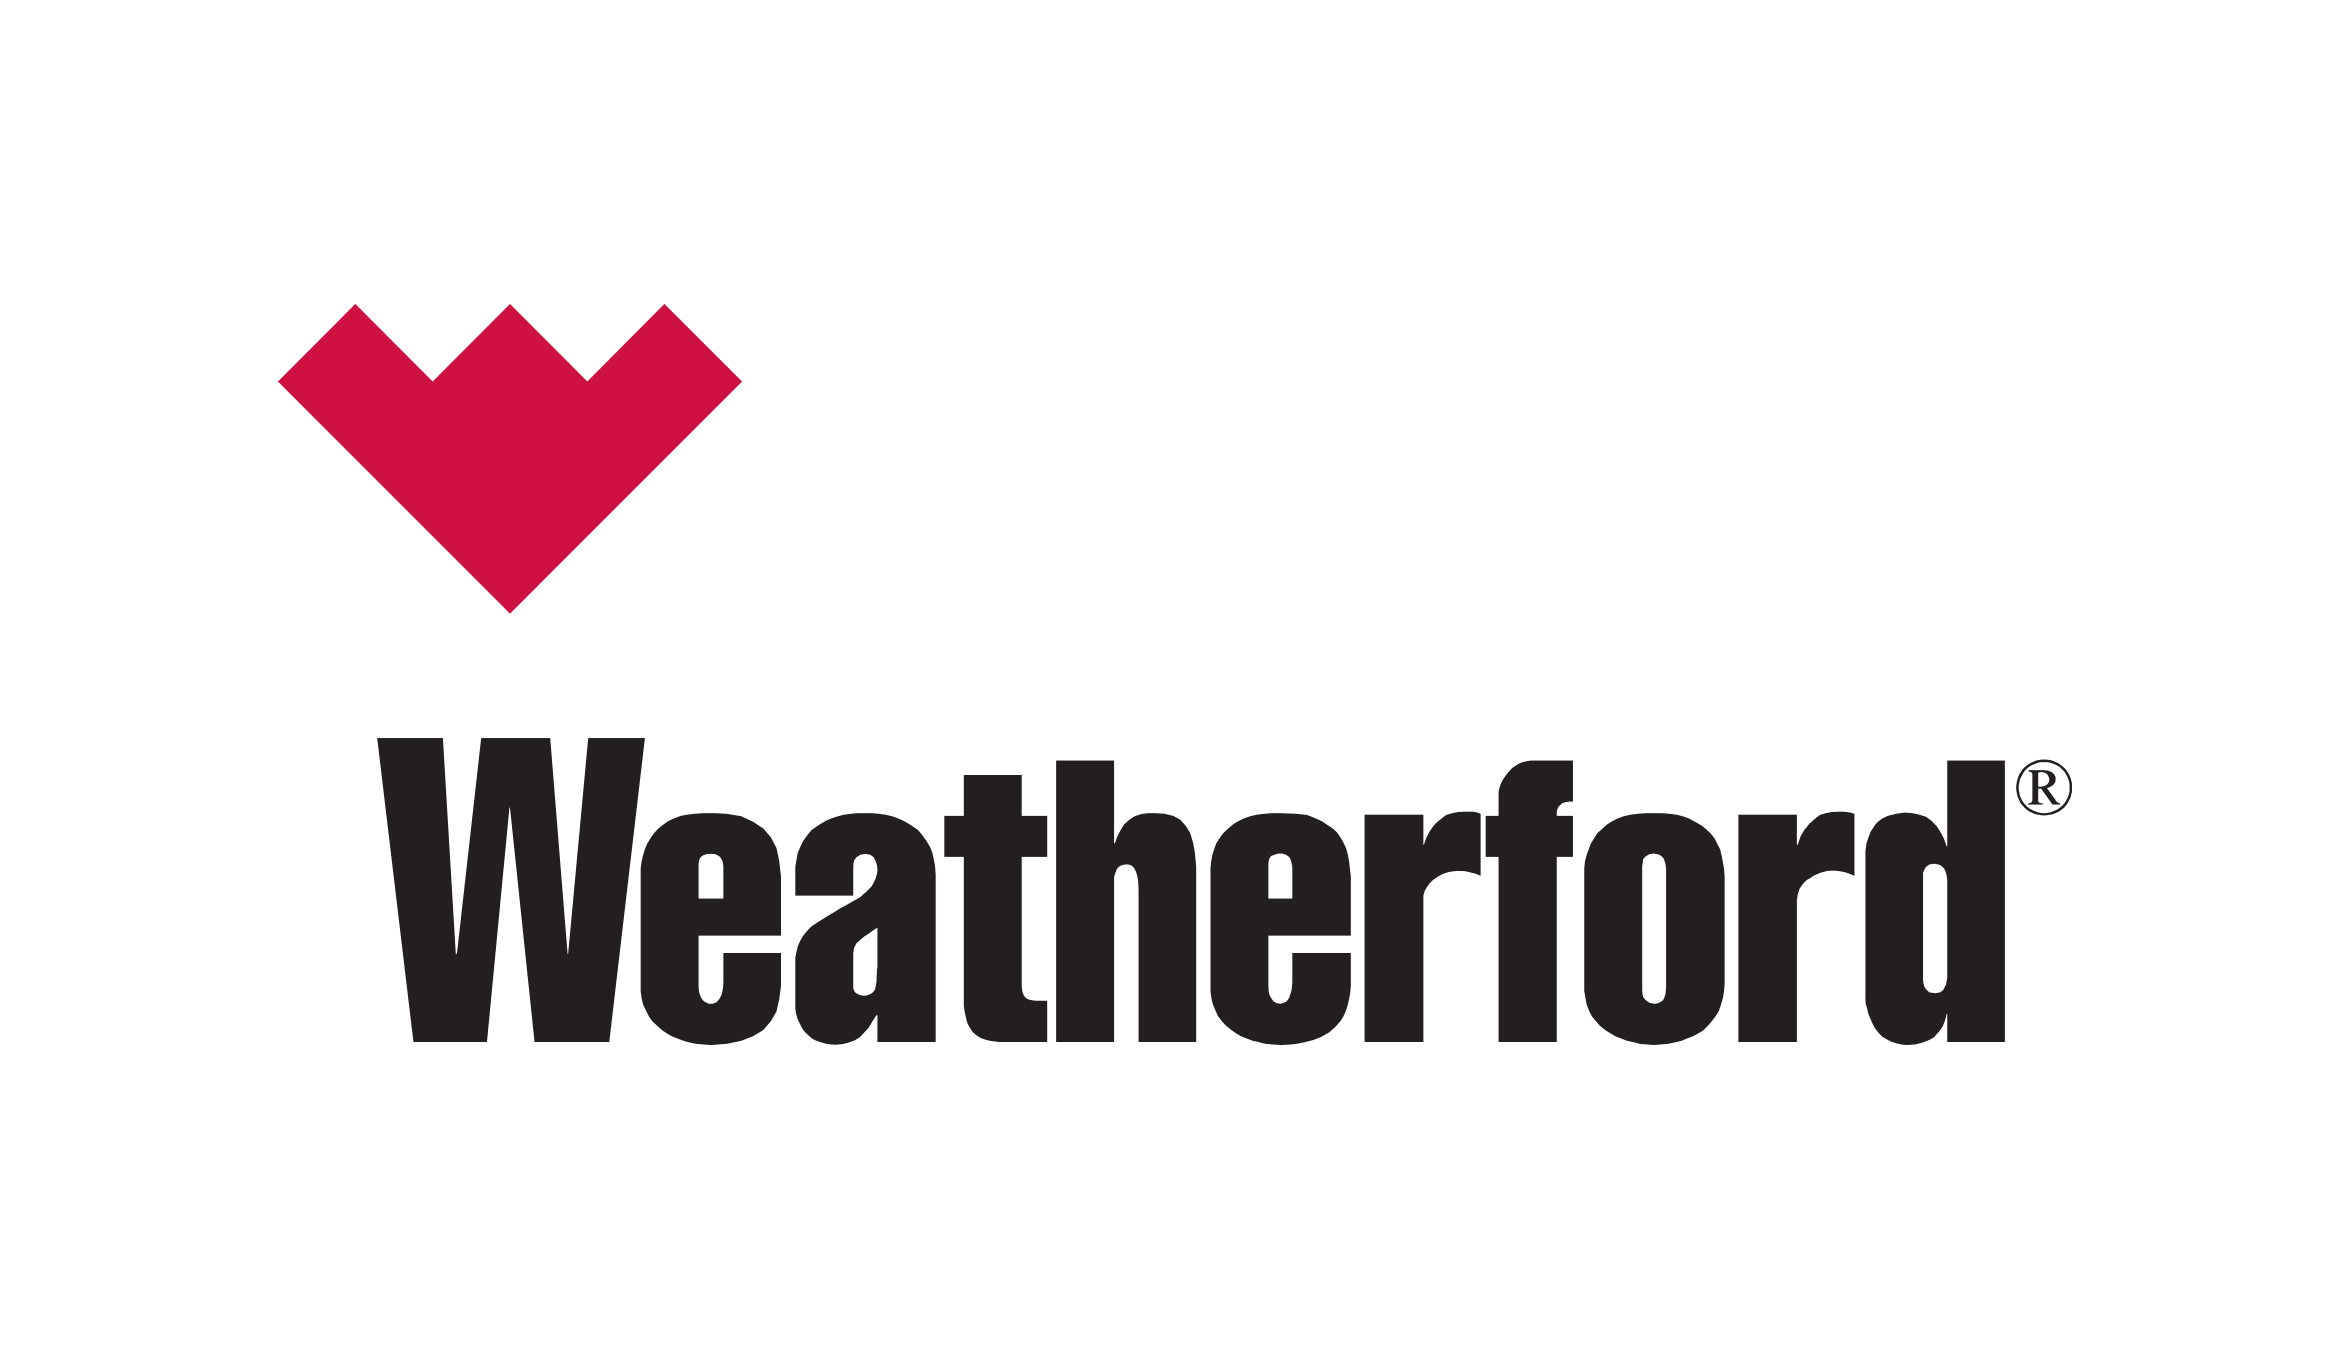 Weatherford Awarded Offshore Intervention Services Contract with Petrobras